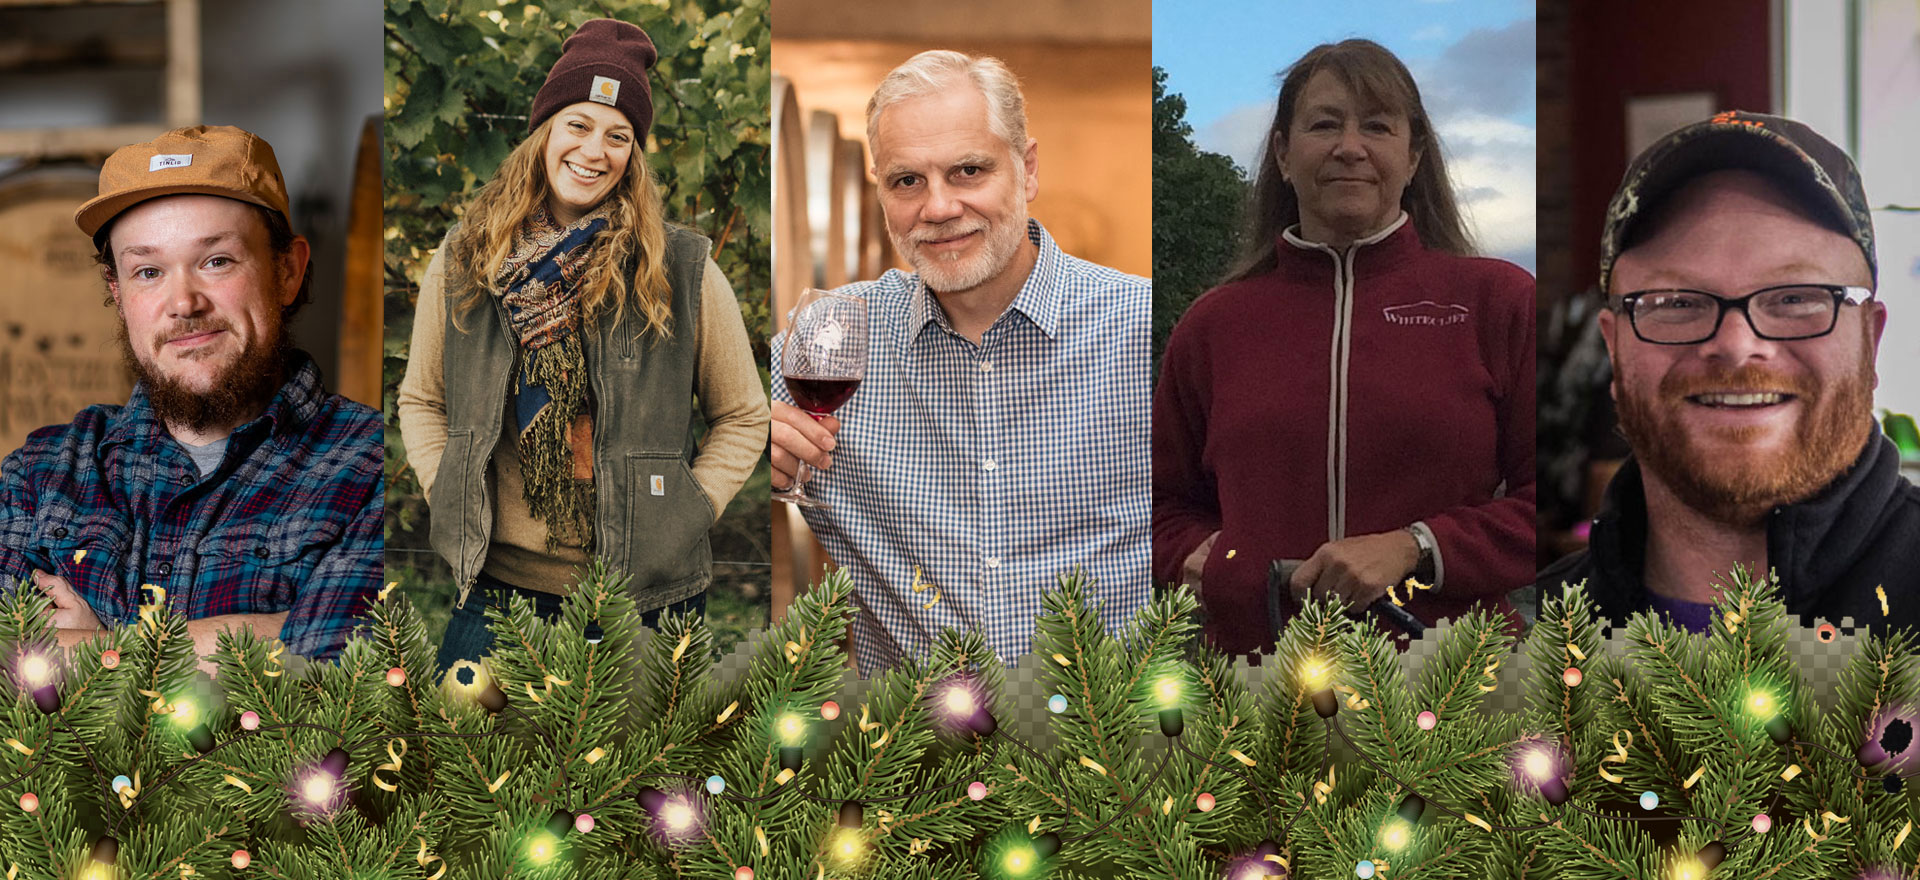 New York Wine Guide for the Holidays – selections for the 2021 season